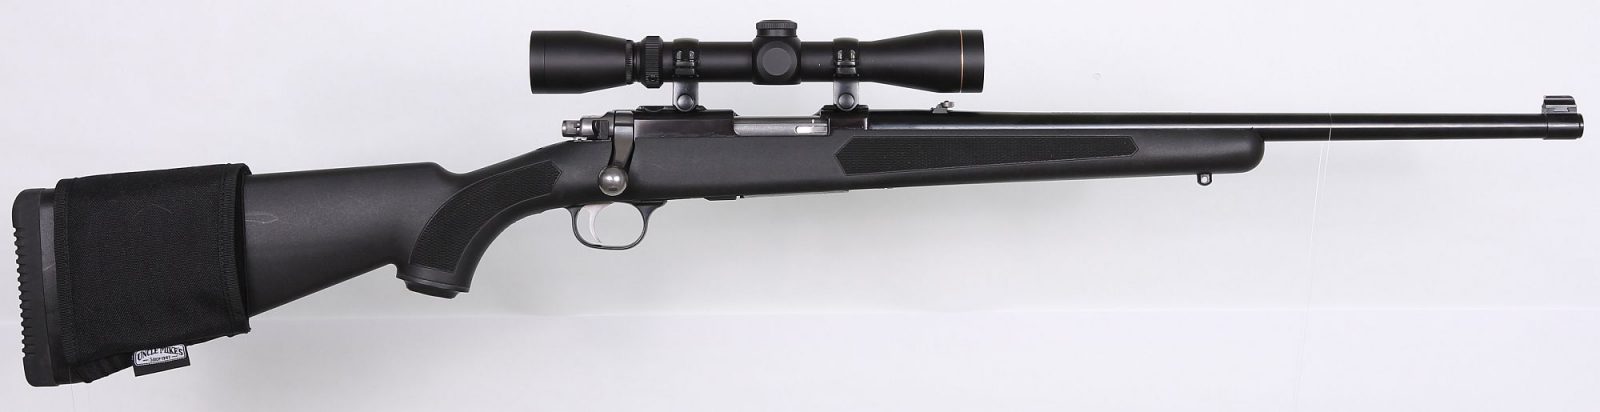 Ruger 77/44 Review.